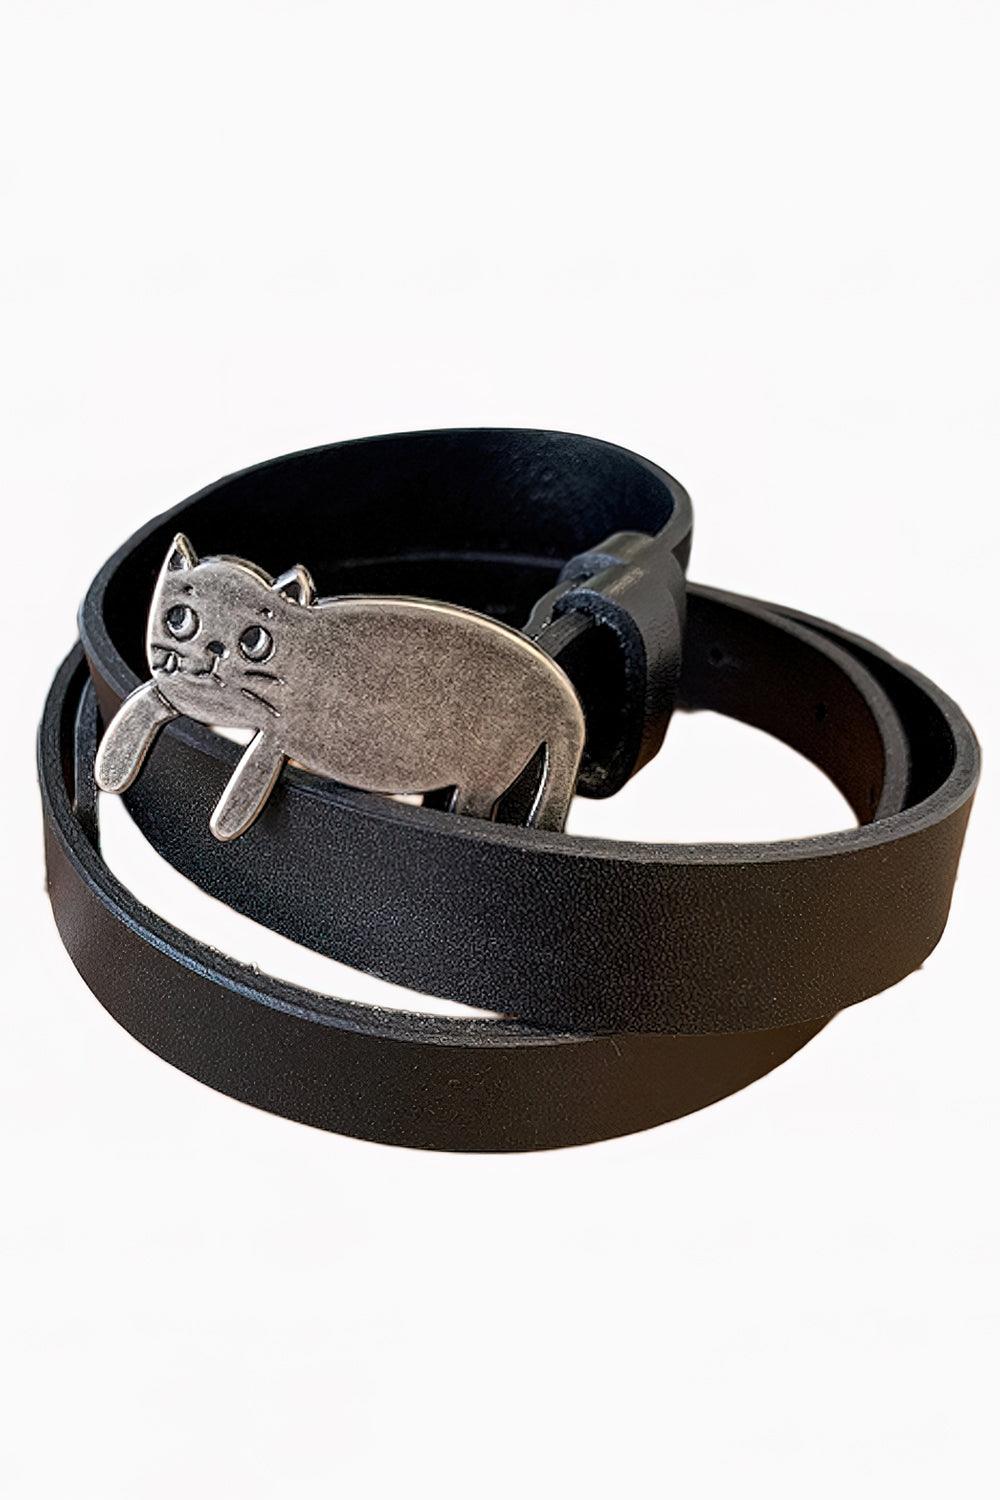 Cute Crying Cat Buckle Belt - Aesthetic Clothes Shop